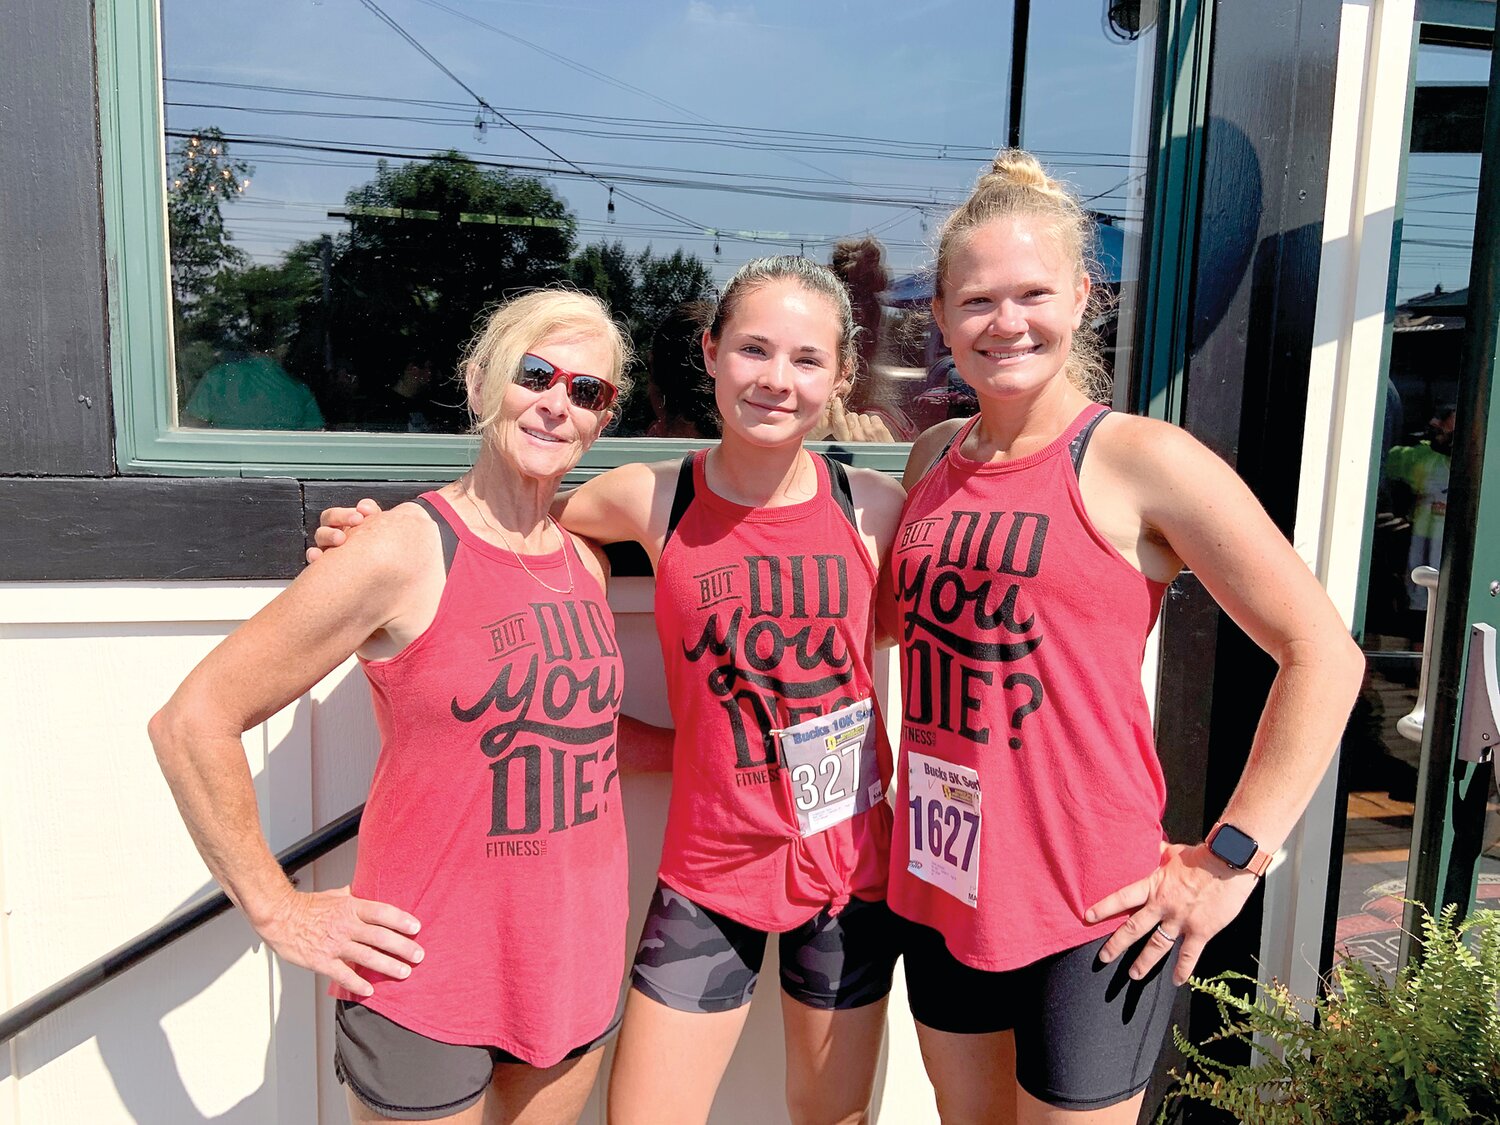 Gert Freas, left, is joined by her granddaughter, Kira Logiovine, center, and daughter Jacquelyn Darrah at a recent race.